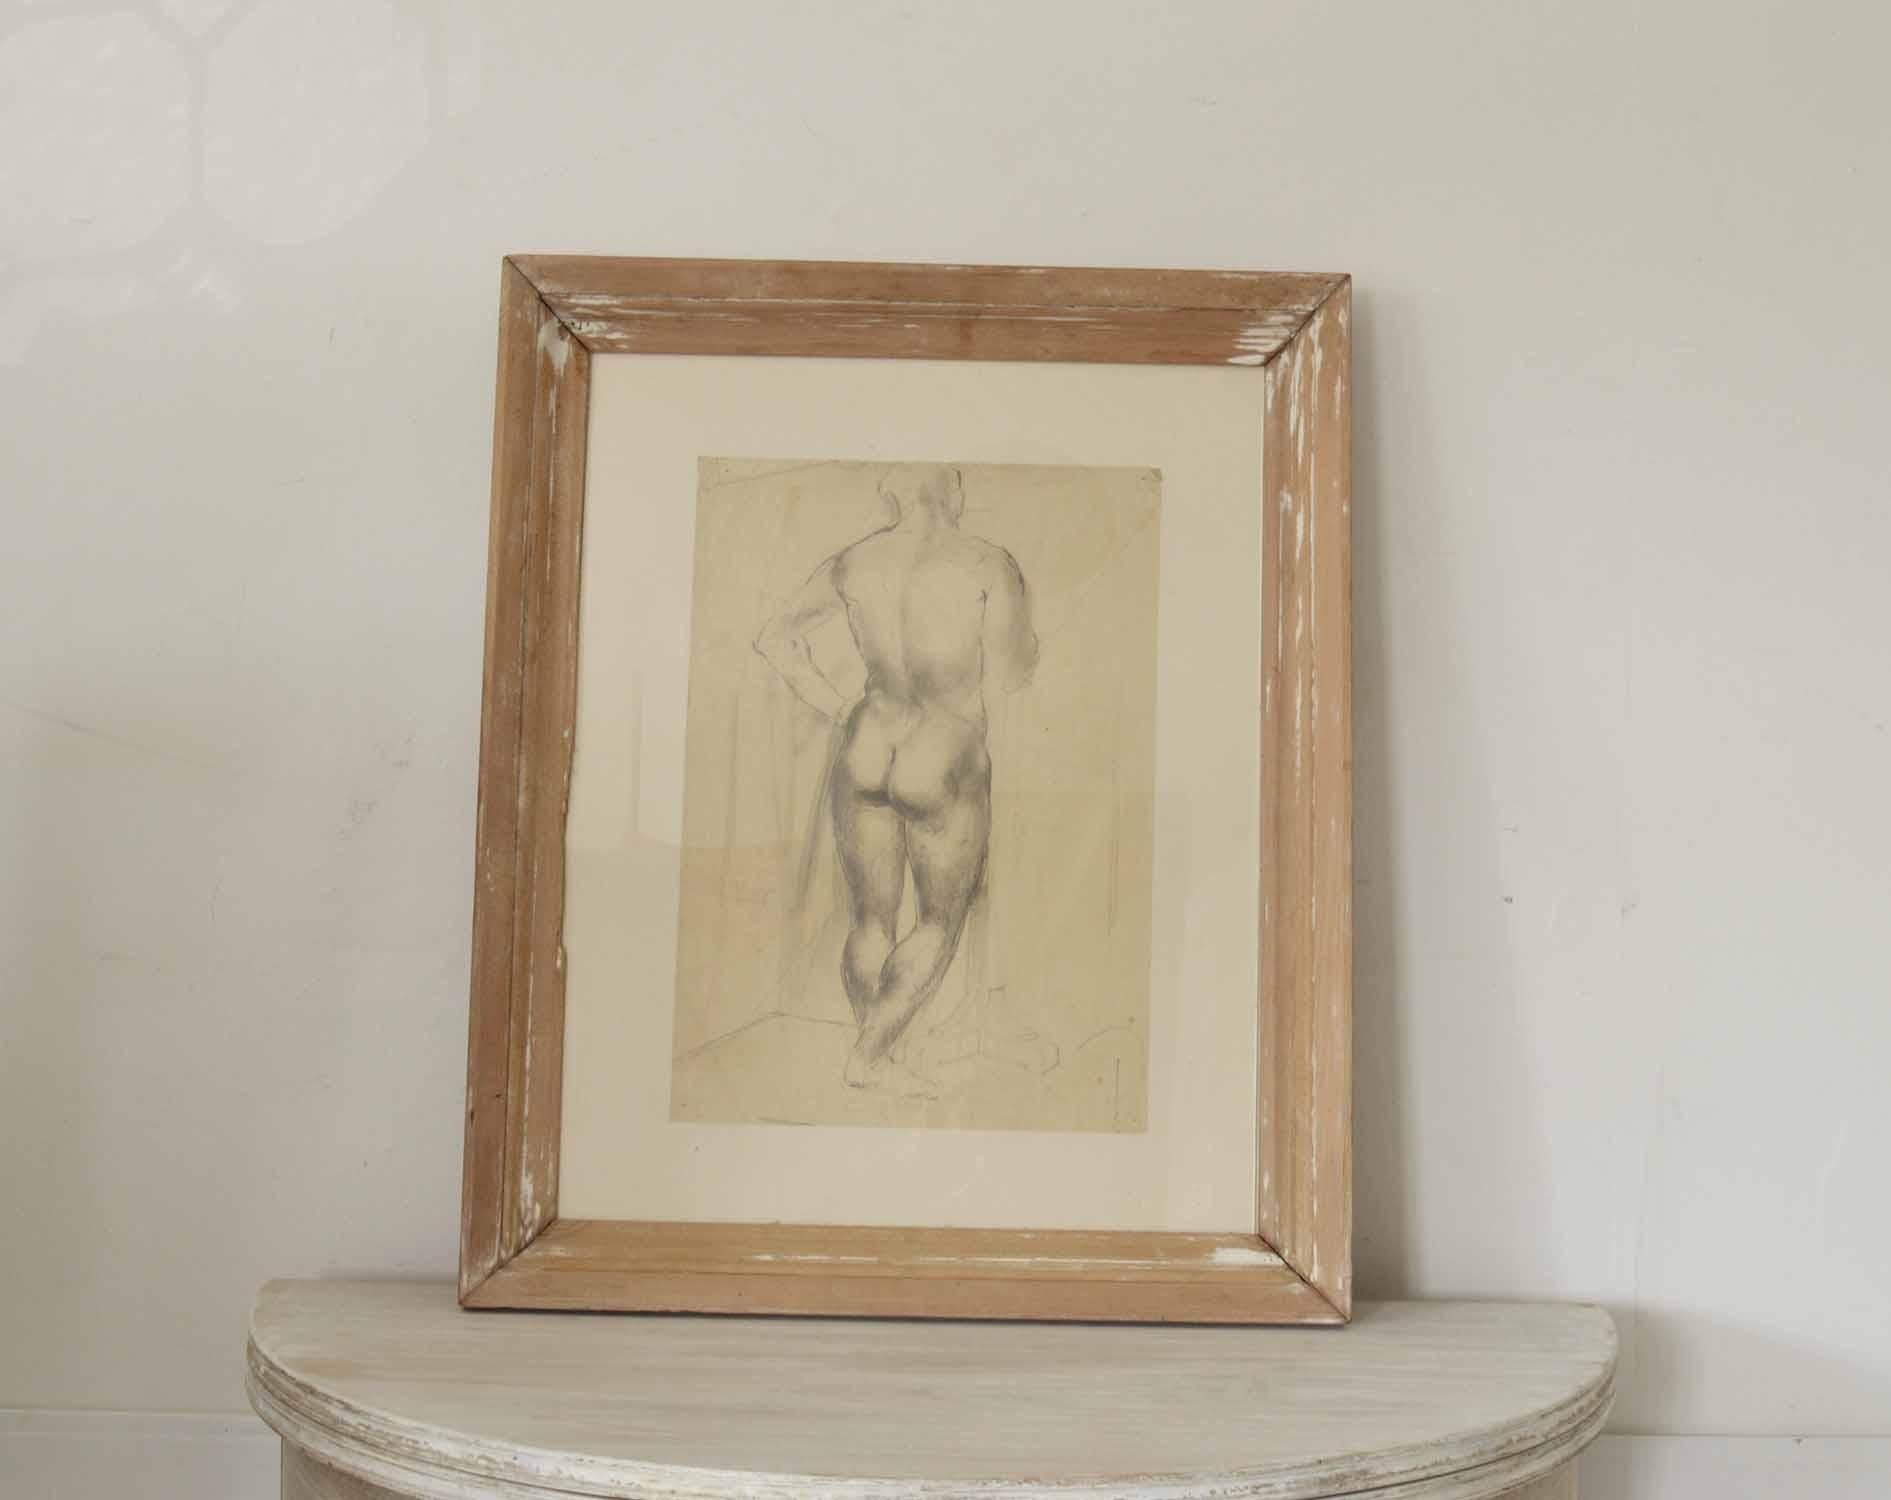 Great Britain (UK) Drawing of a Male Nude by Peter William Ibbetson, circa 1930